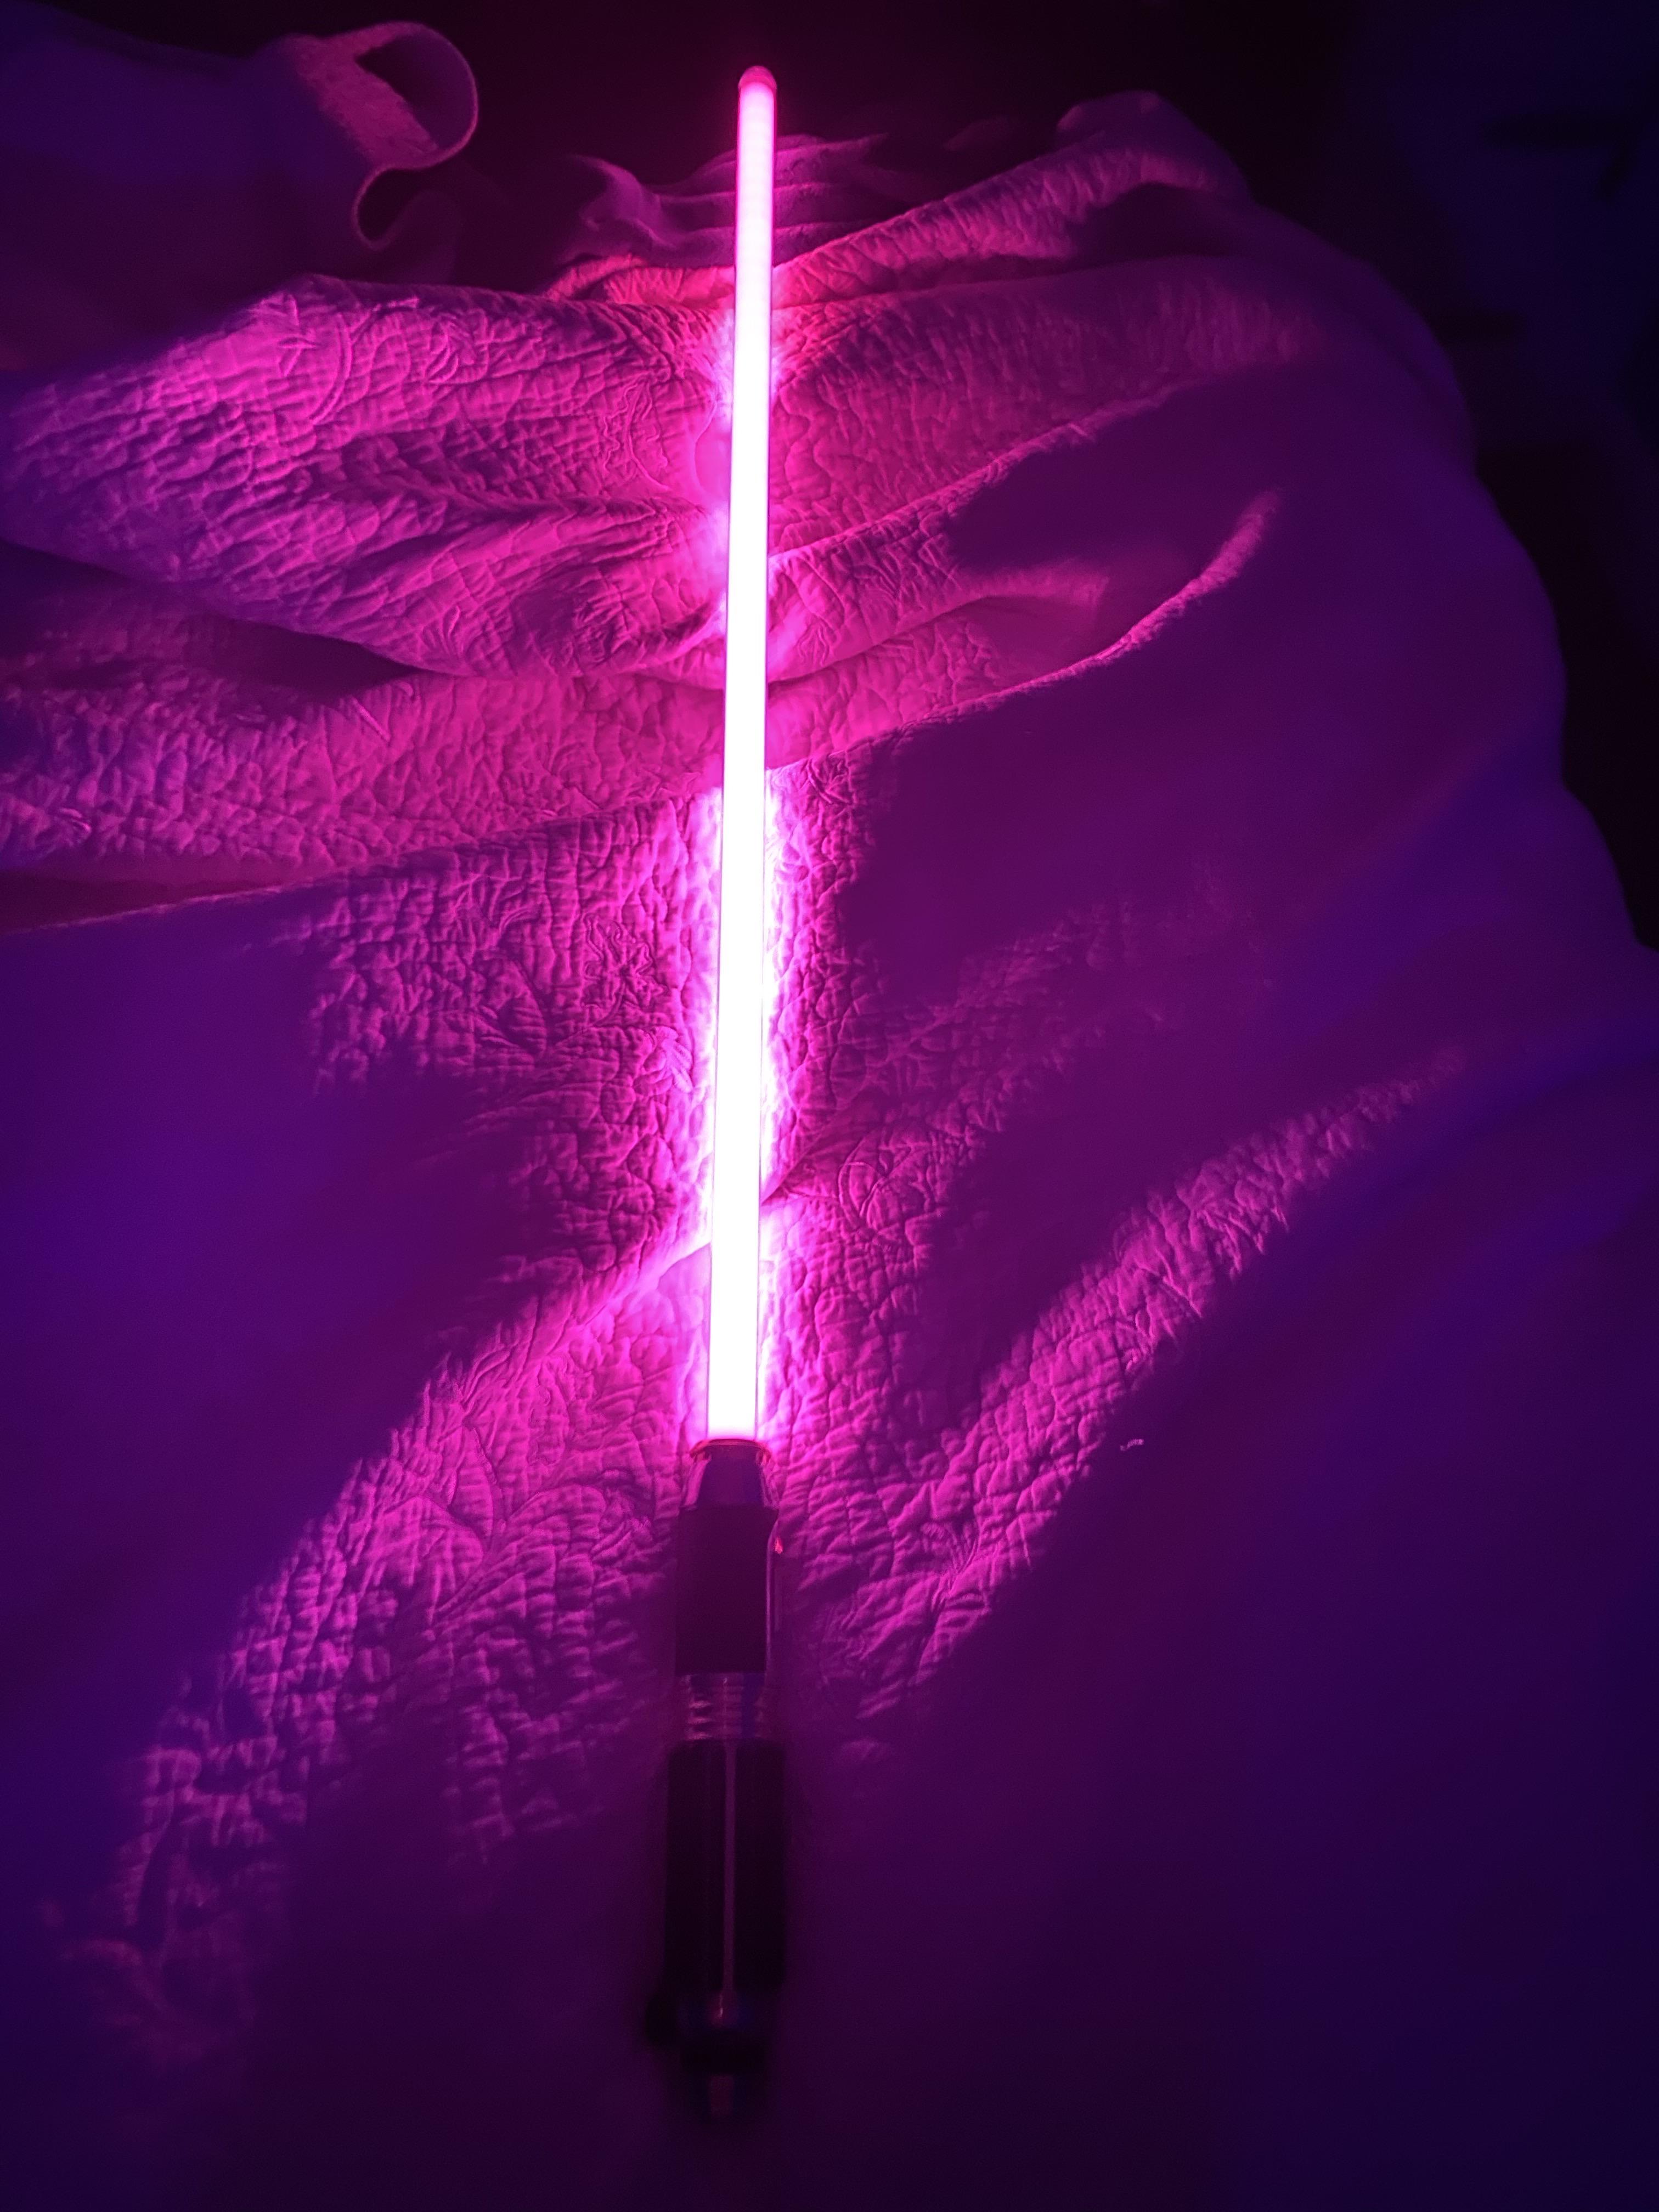 Is my Mace Windu Lightsaber supposed to be pink? It was pink when I first bought it so I'm wondering if it's the same for everyone else